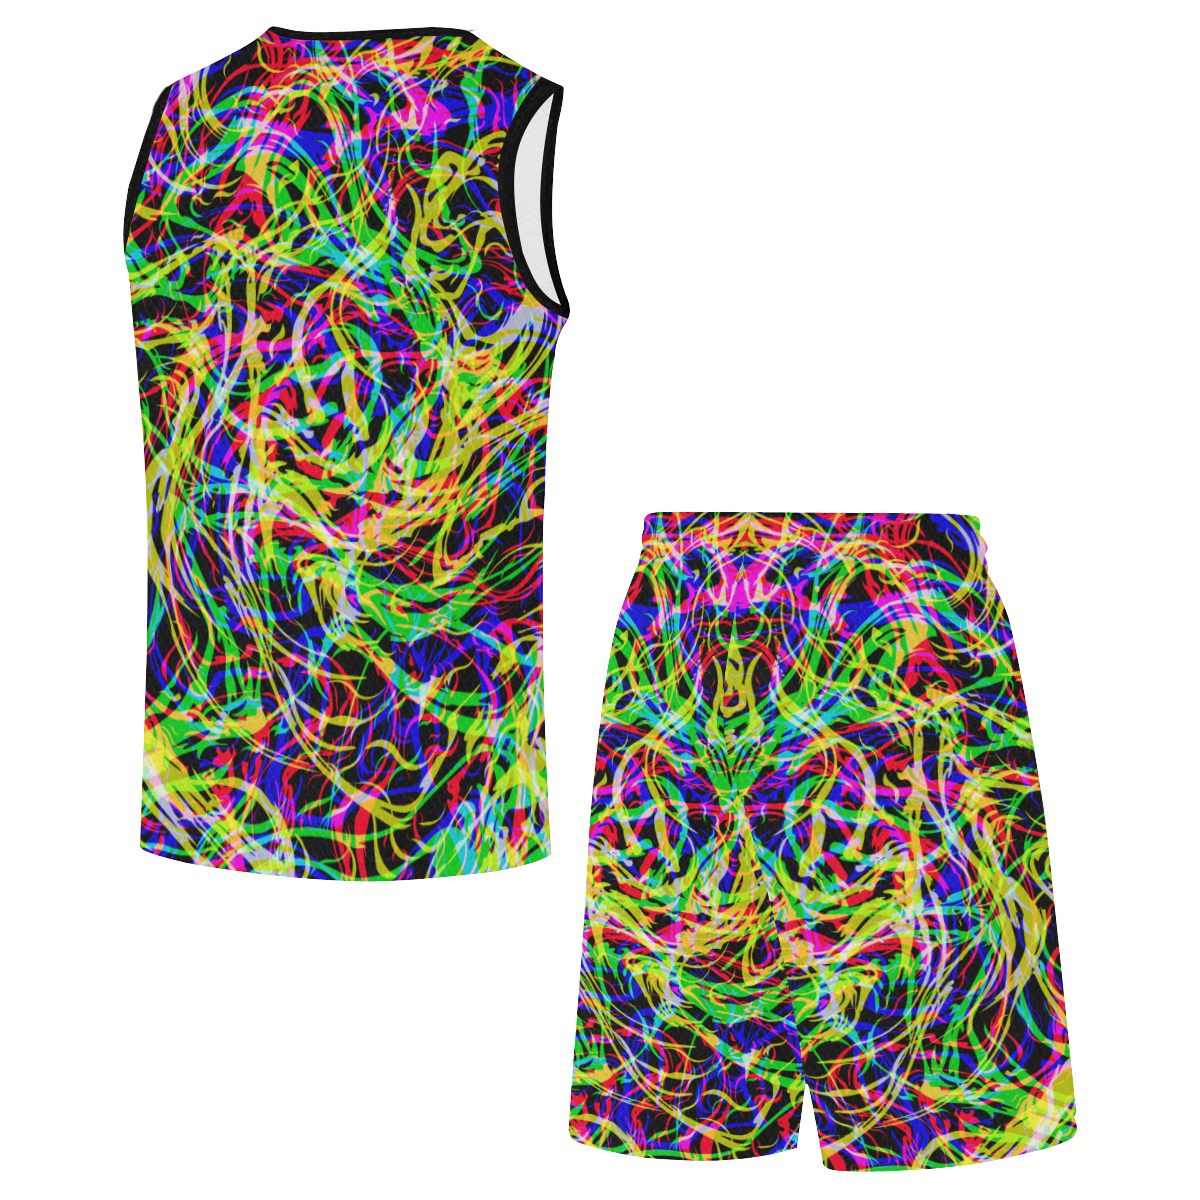 colorful abstract pattern All Over Print Basketball Uniform